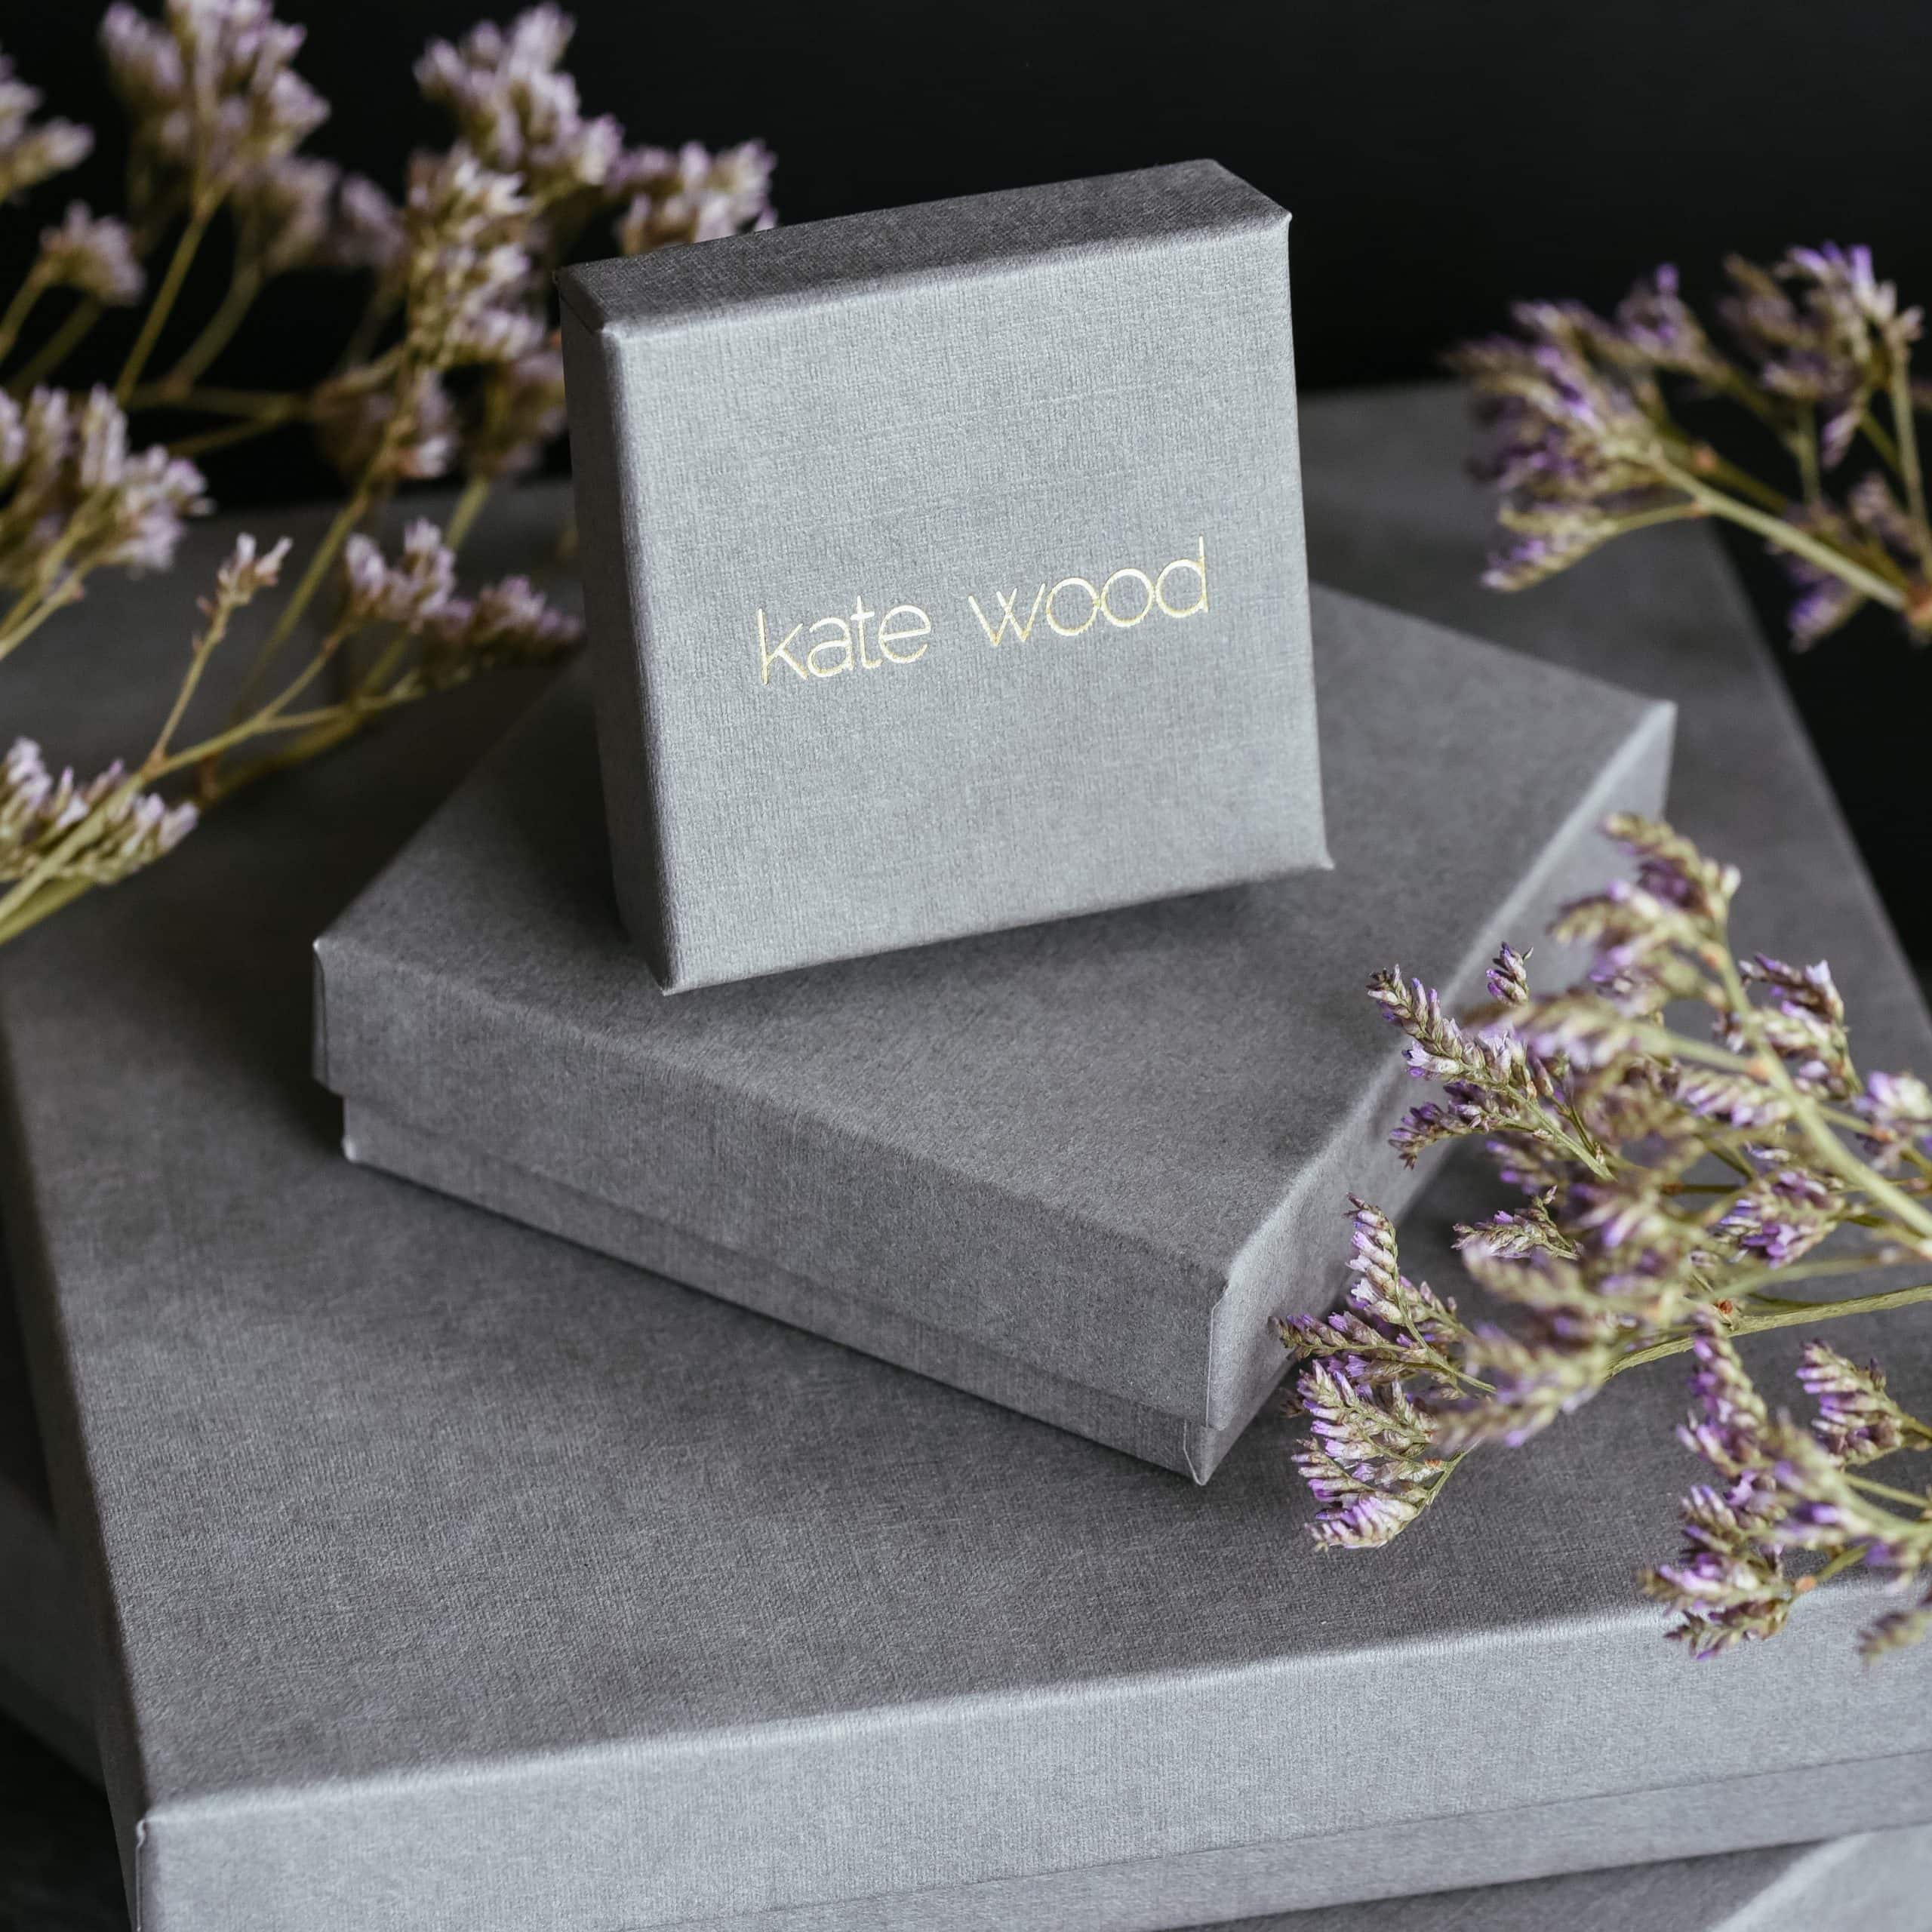 Kate Wood Jewellery boxes in grey and gold